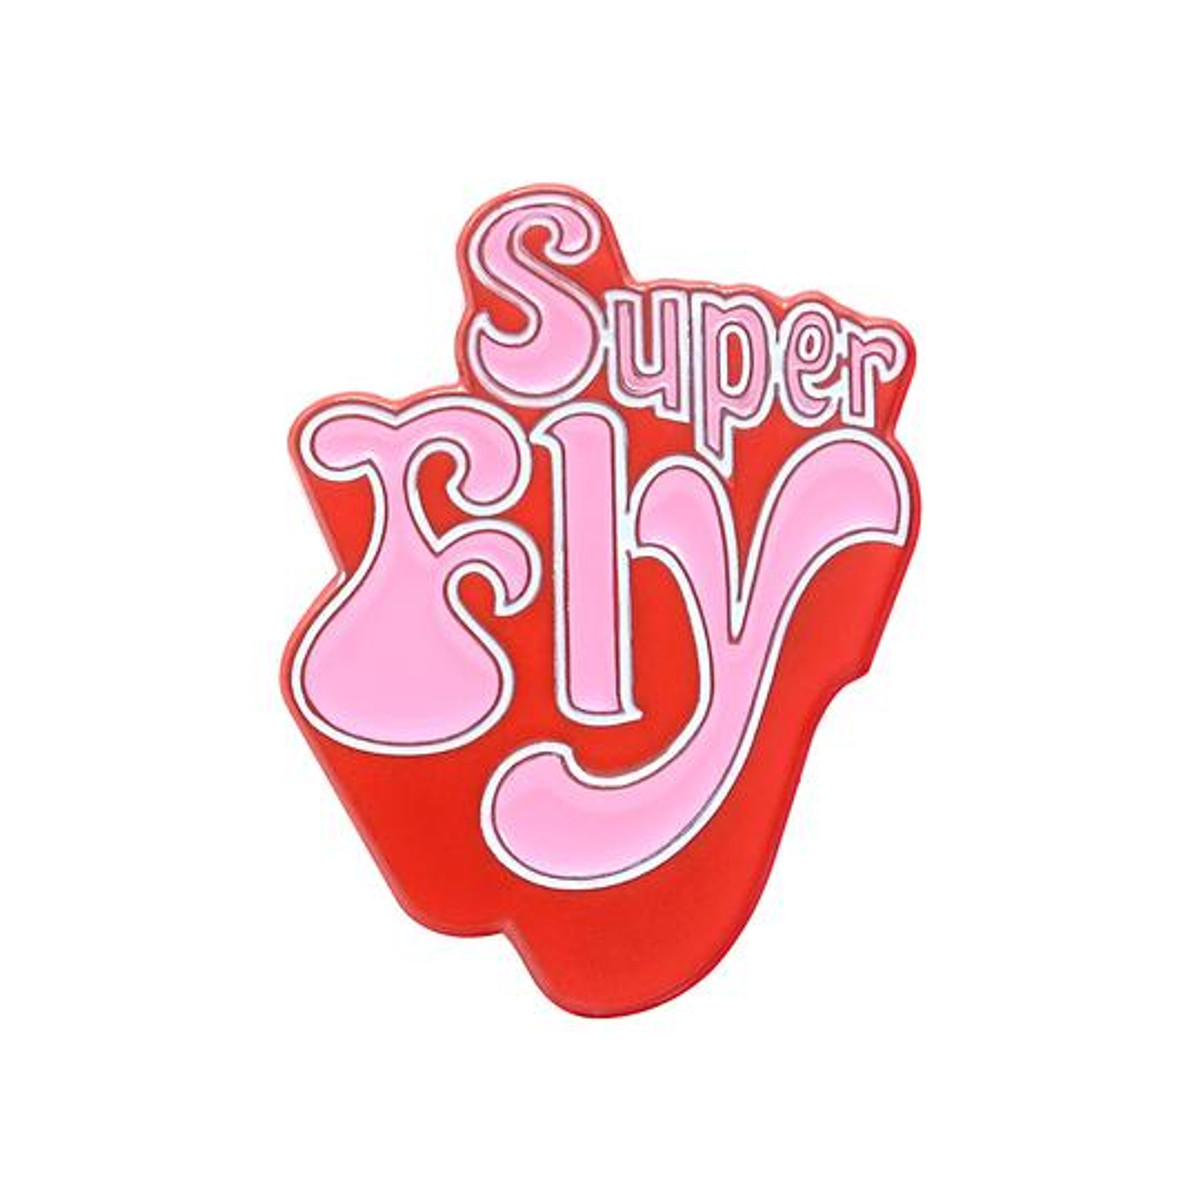 SuperFly by KingPinz